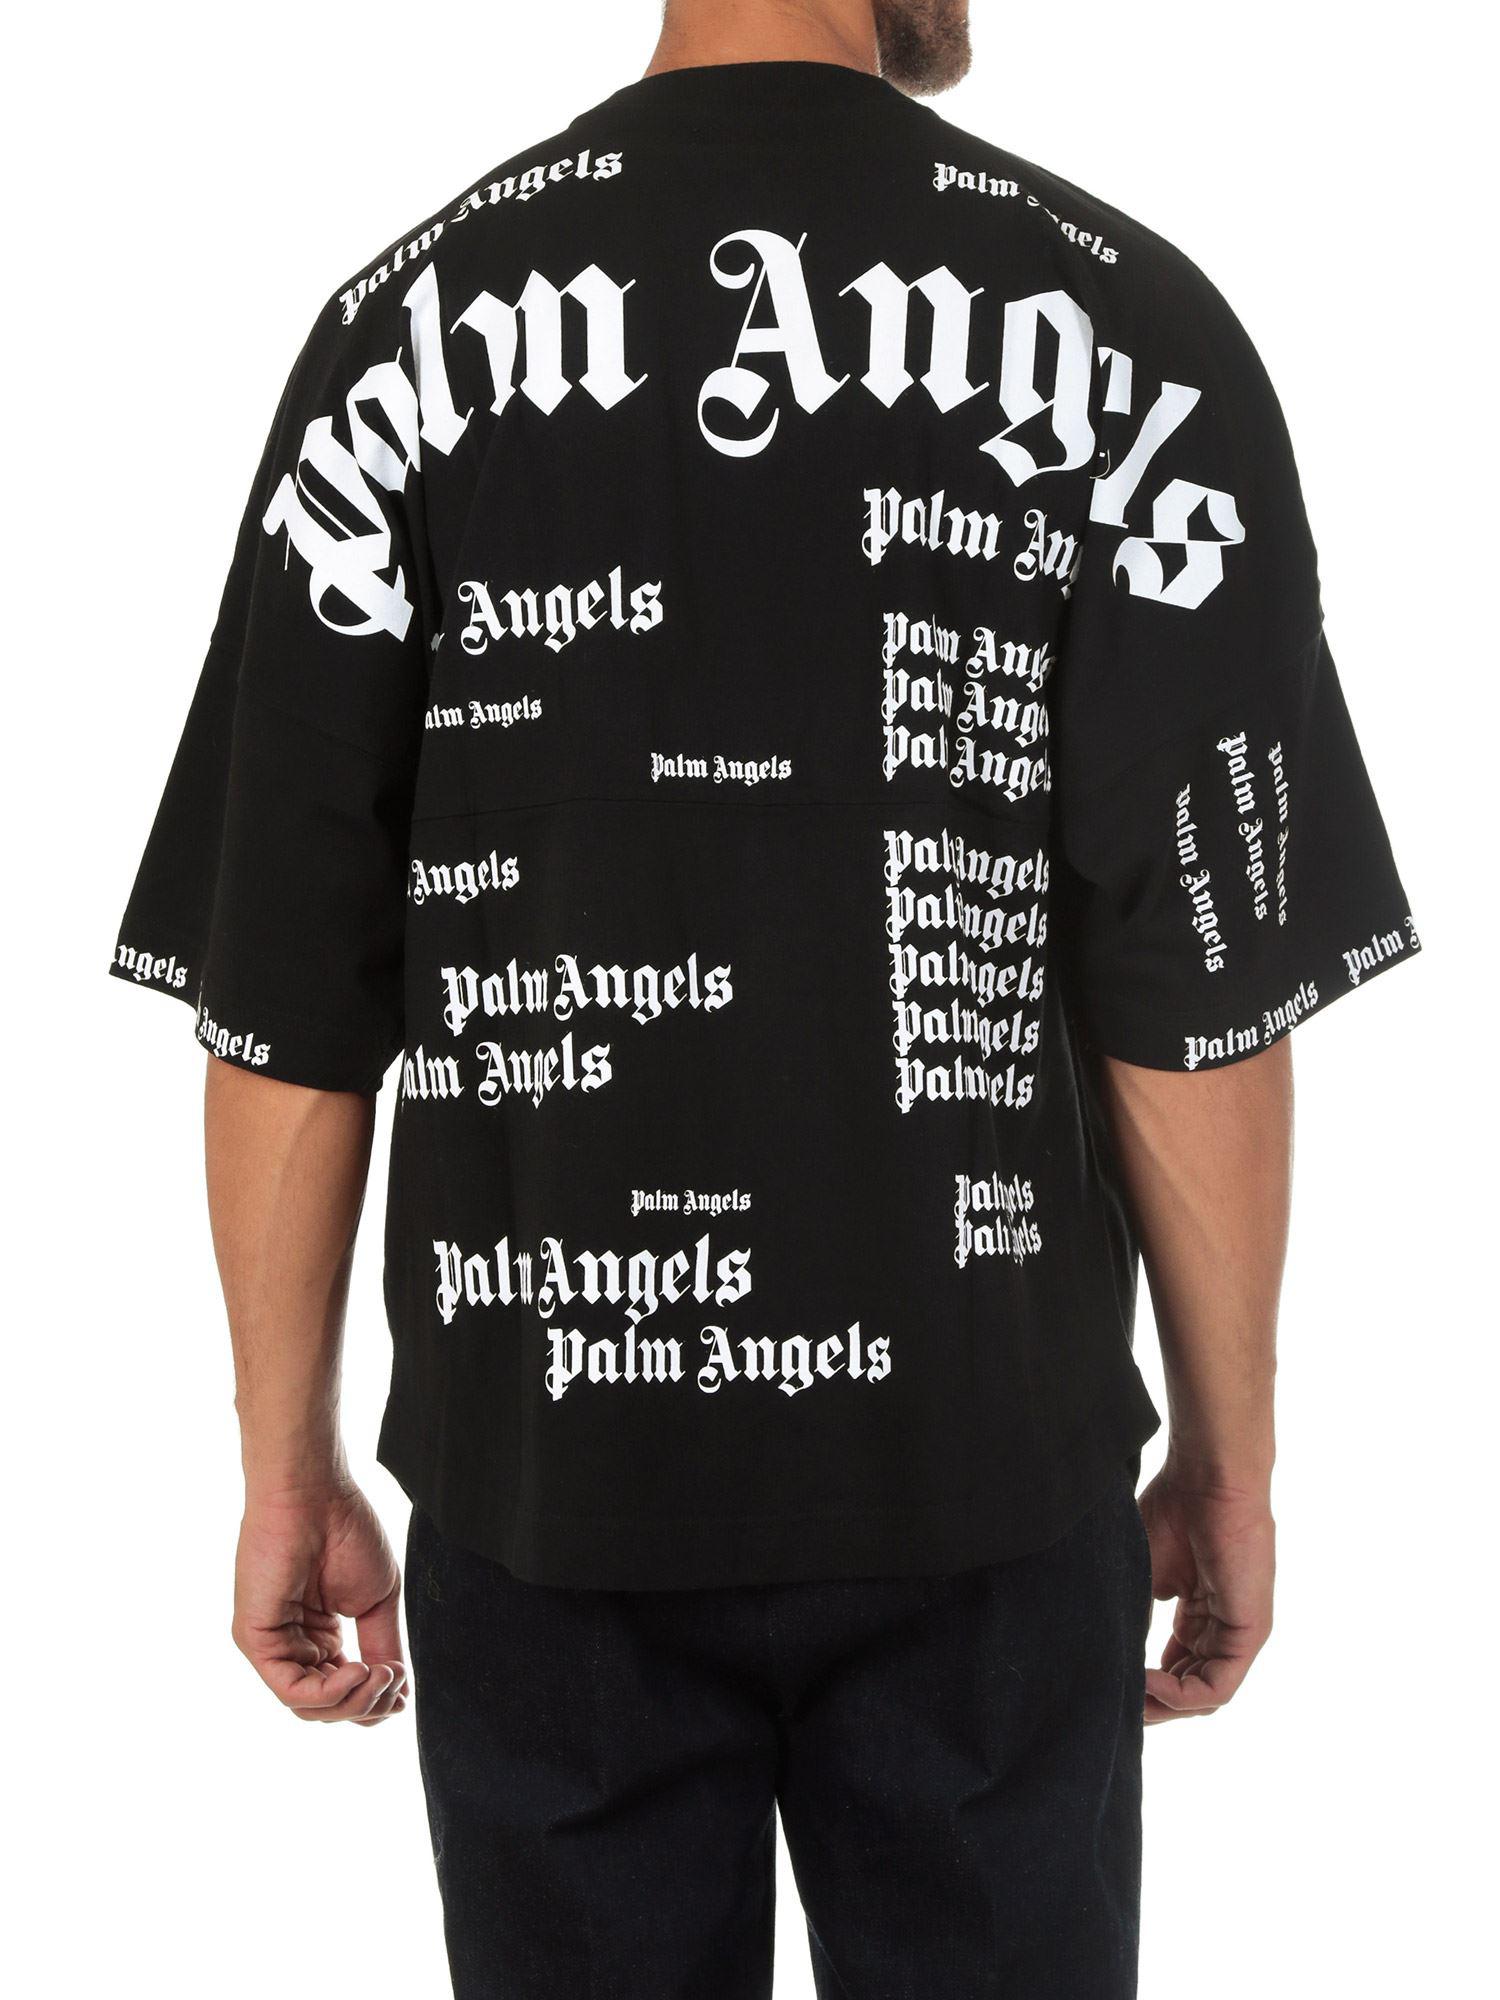 palm angels all over t shirt